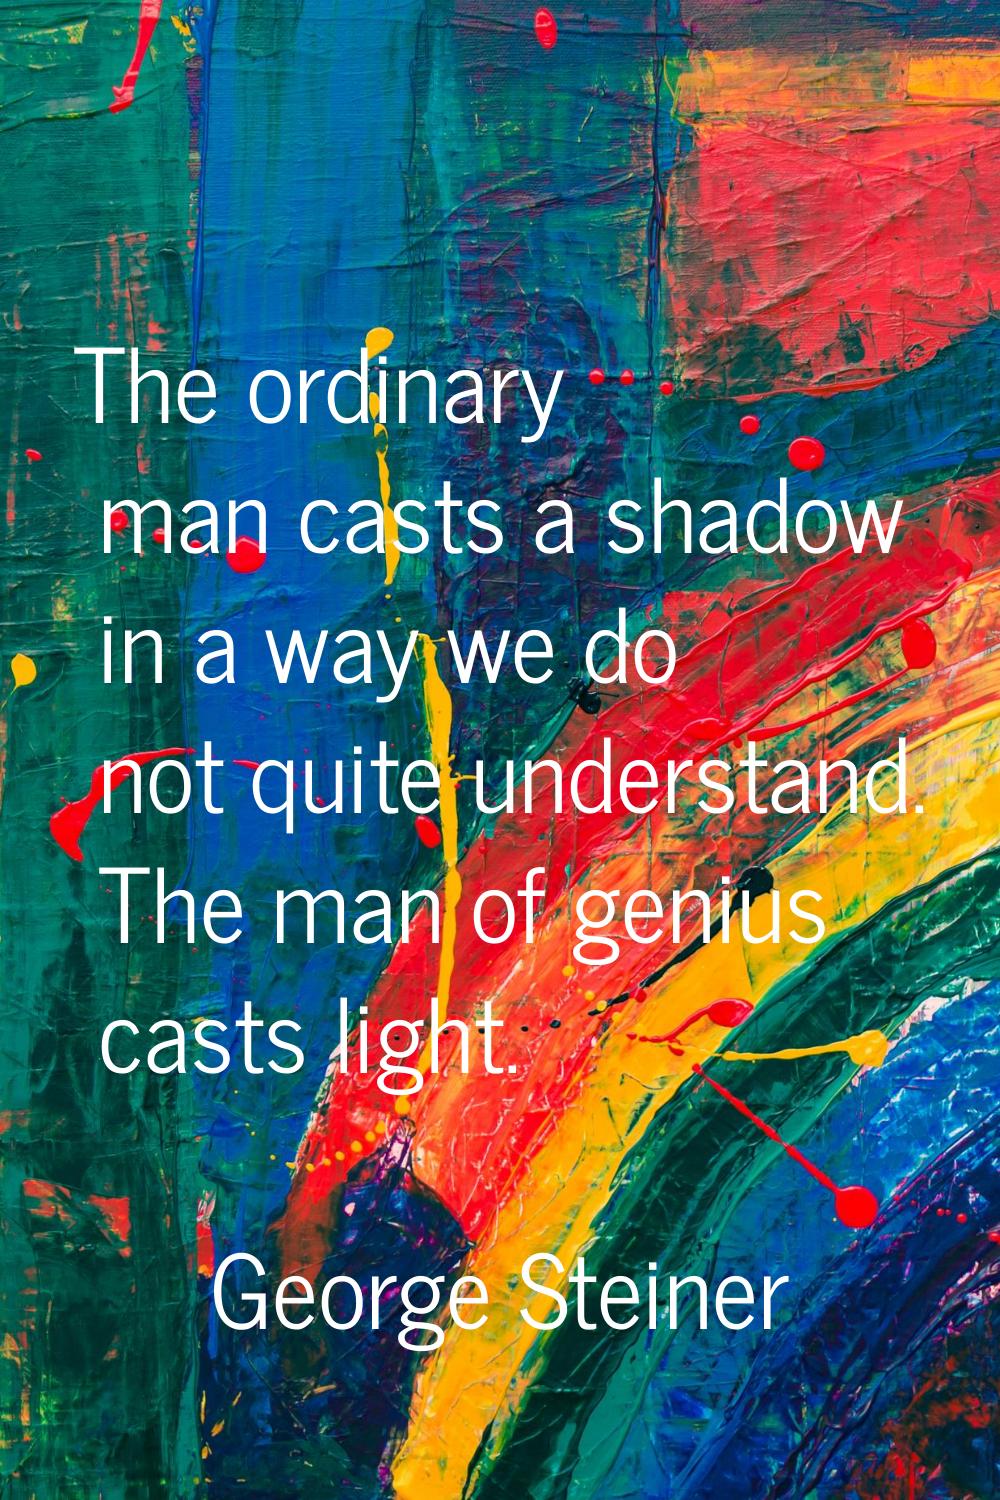 The ordinary man casts a shadow in a way we do not quite understand. The man of genius casts light.